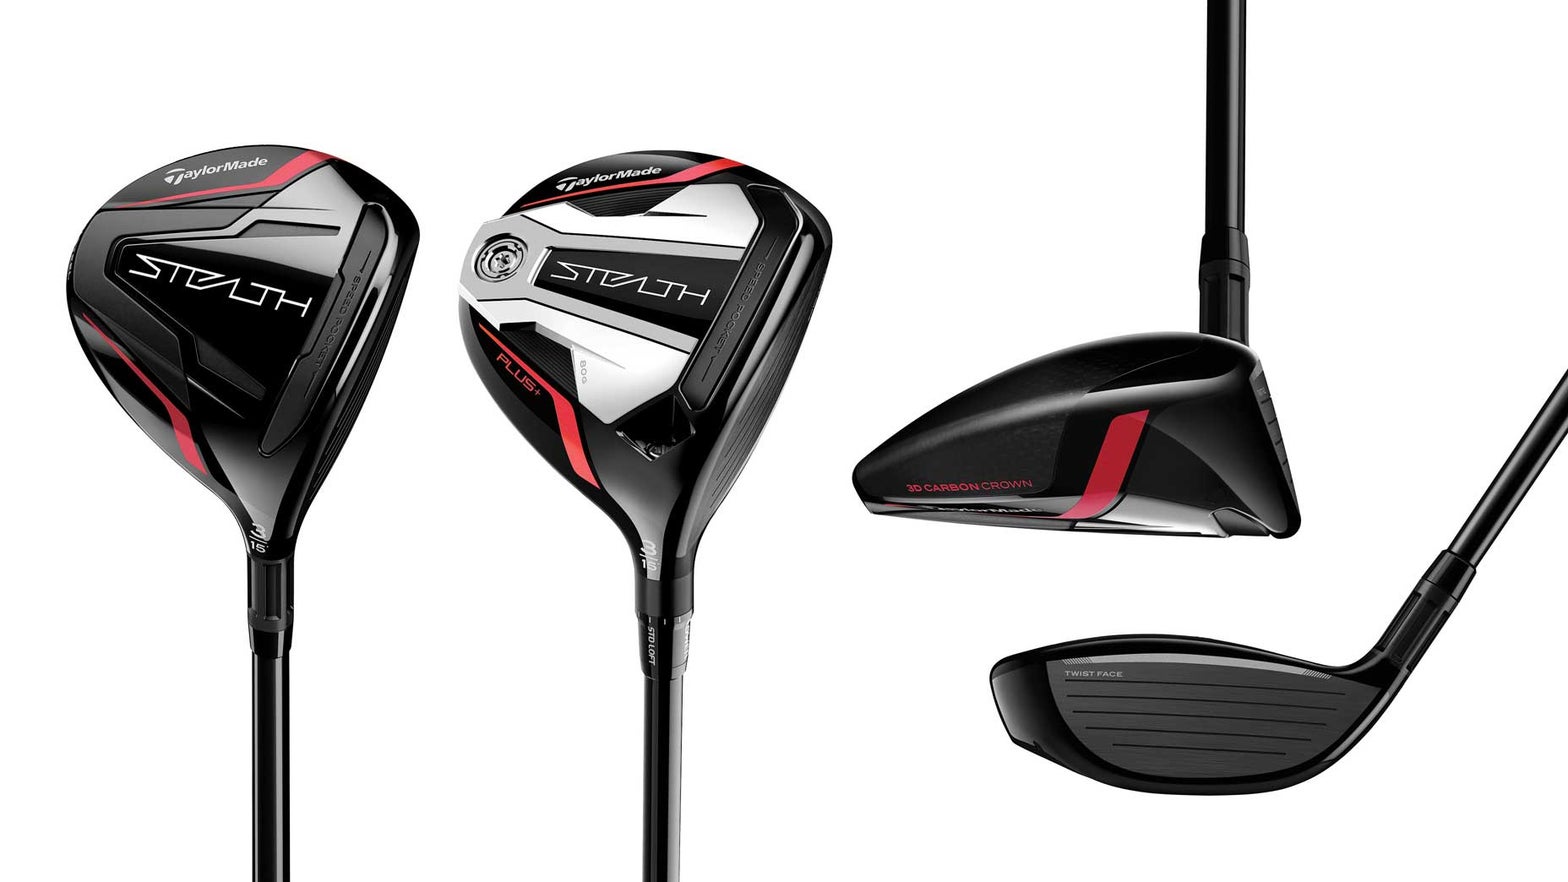 TaylorMade Stealth fairway woods tested and reviewed ClubTest 2022